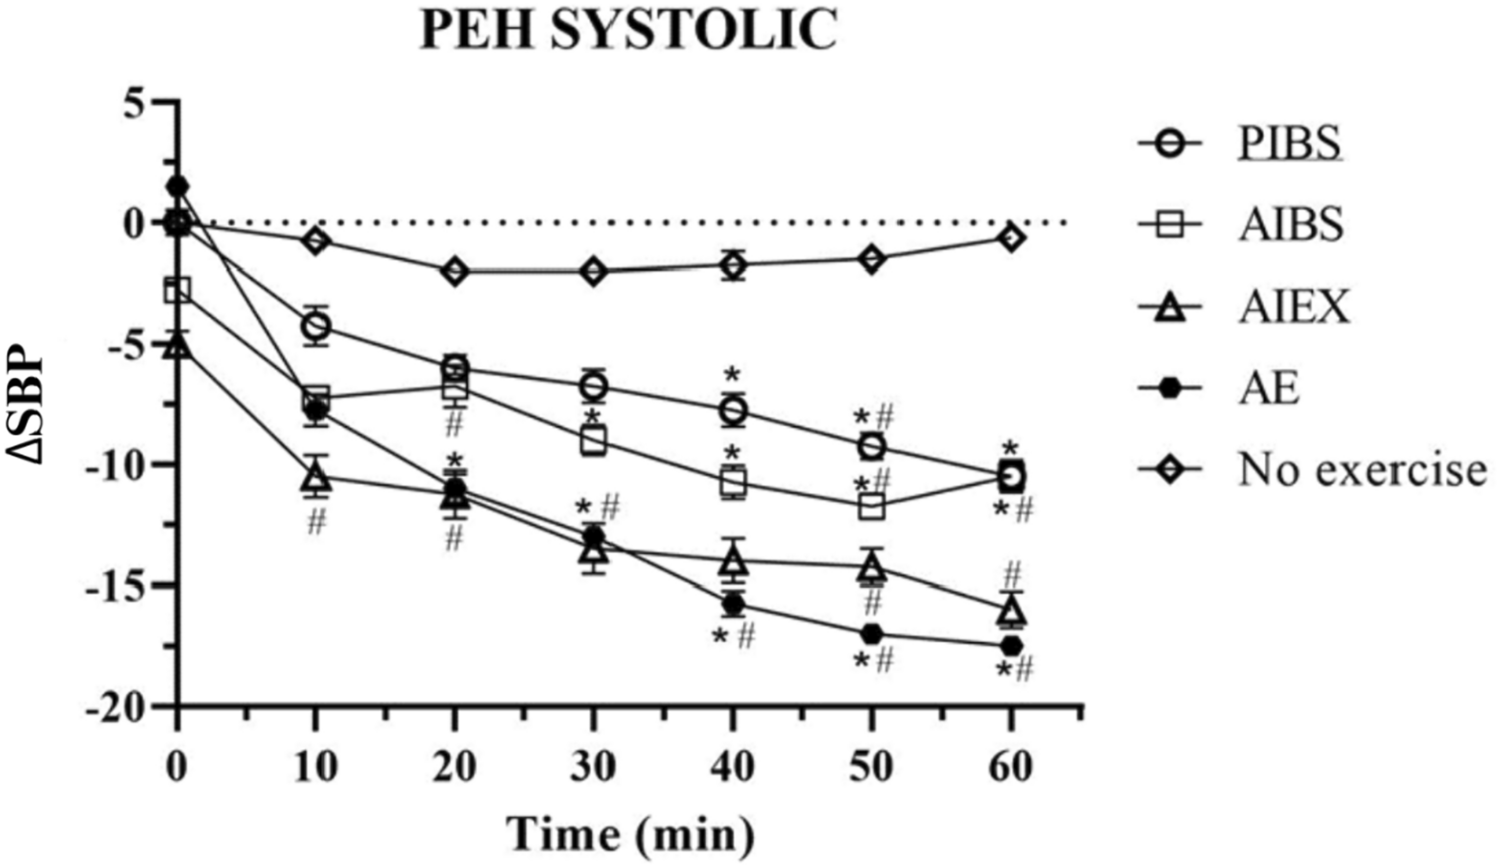 Active intervals between sets and exercise of resistance exercises potentiate the magnitude of post-exercise hypotension in middle-aged hypertensive women